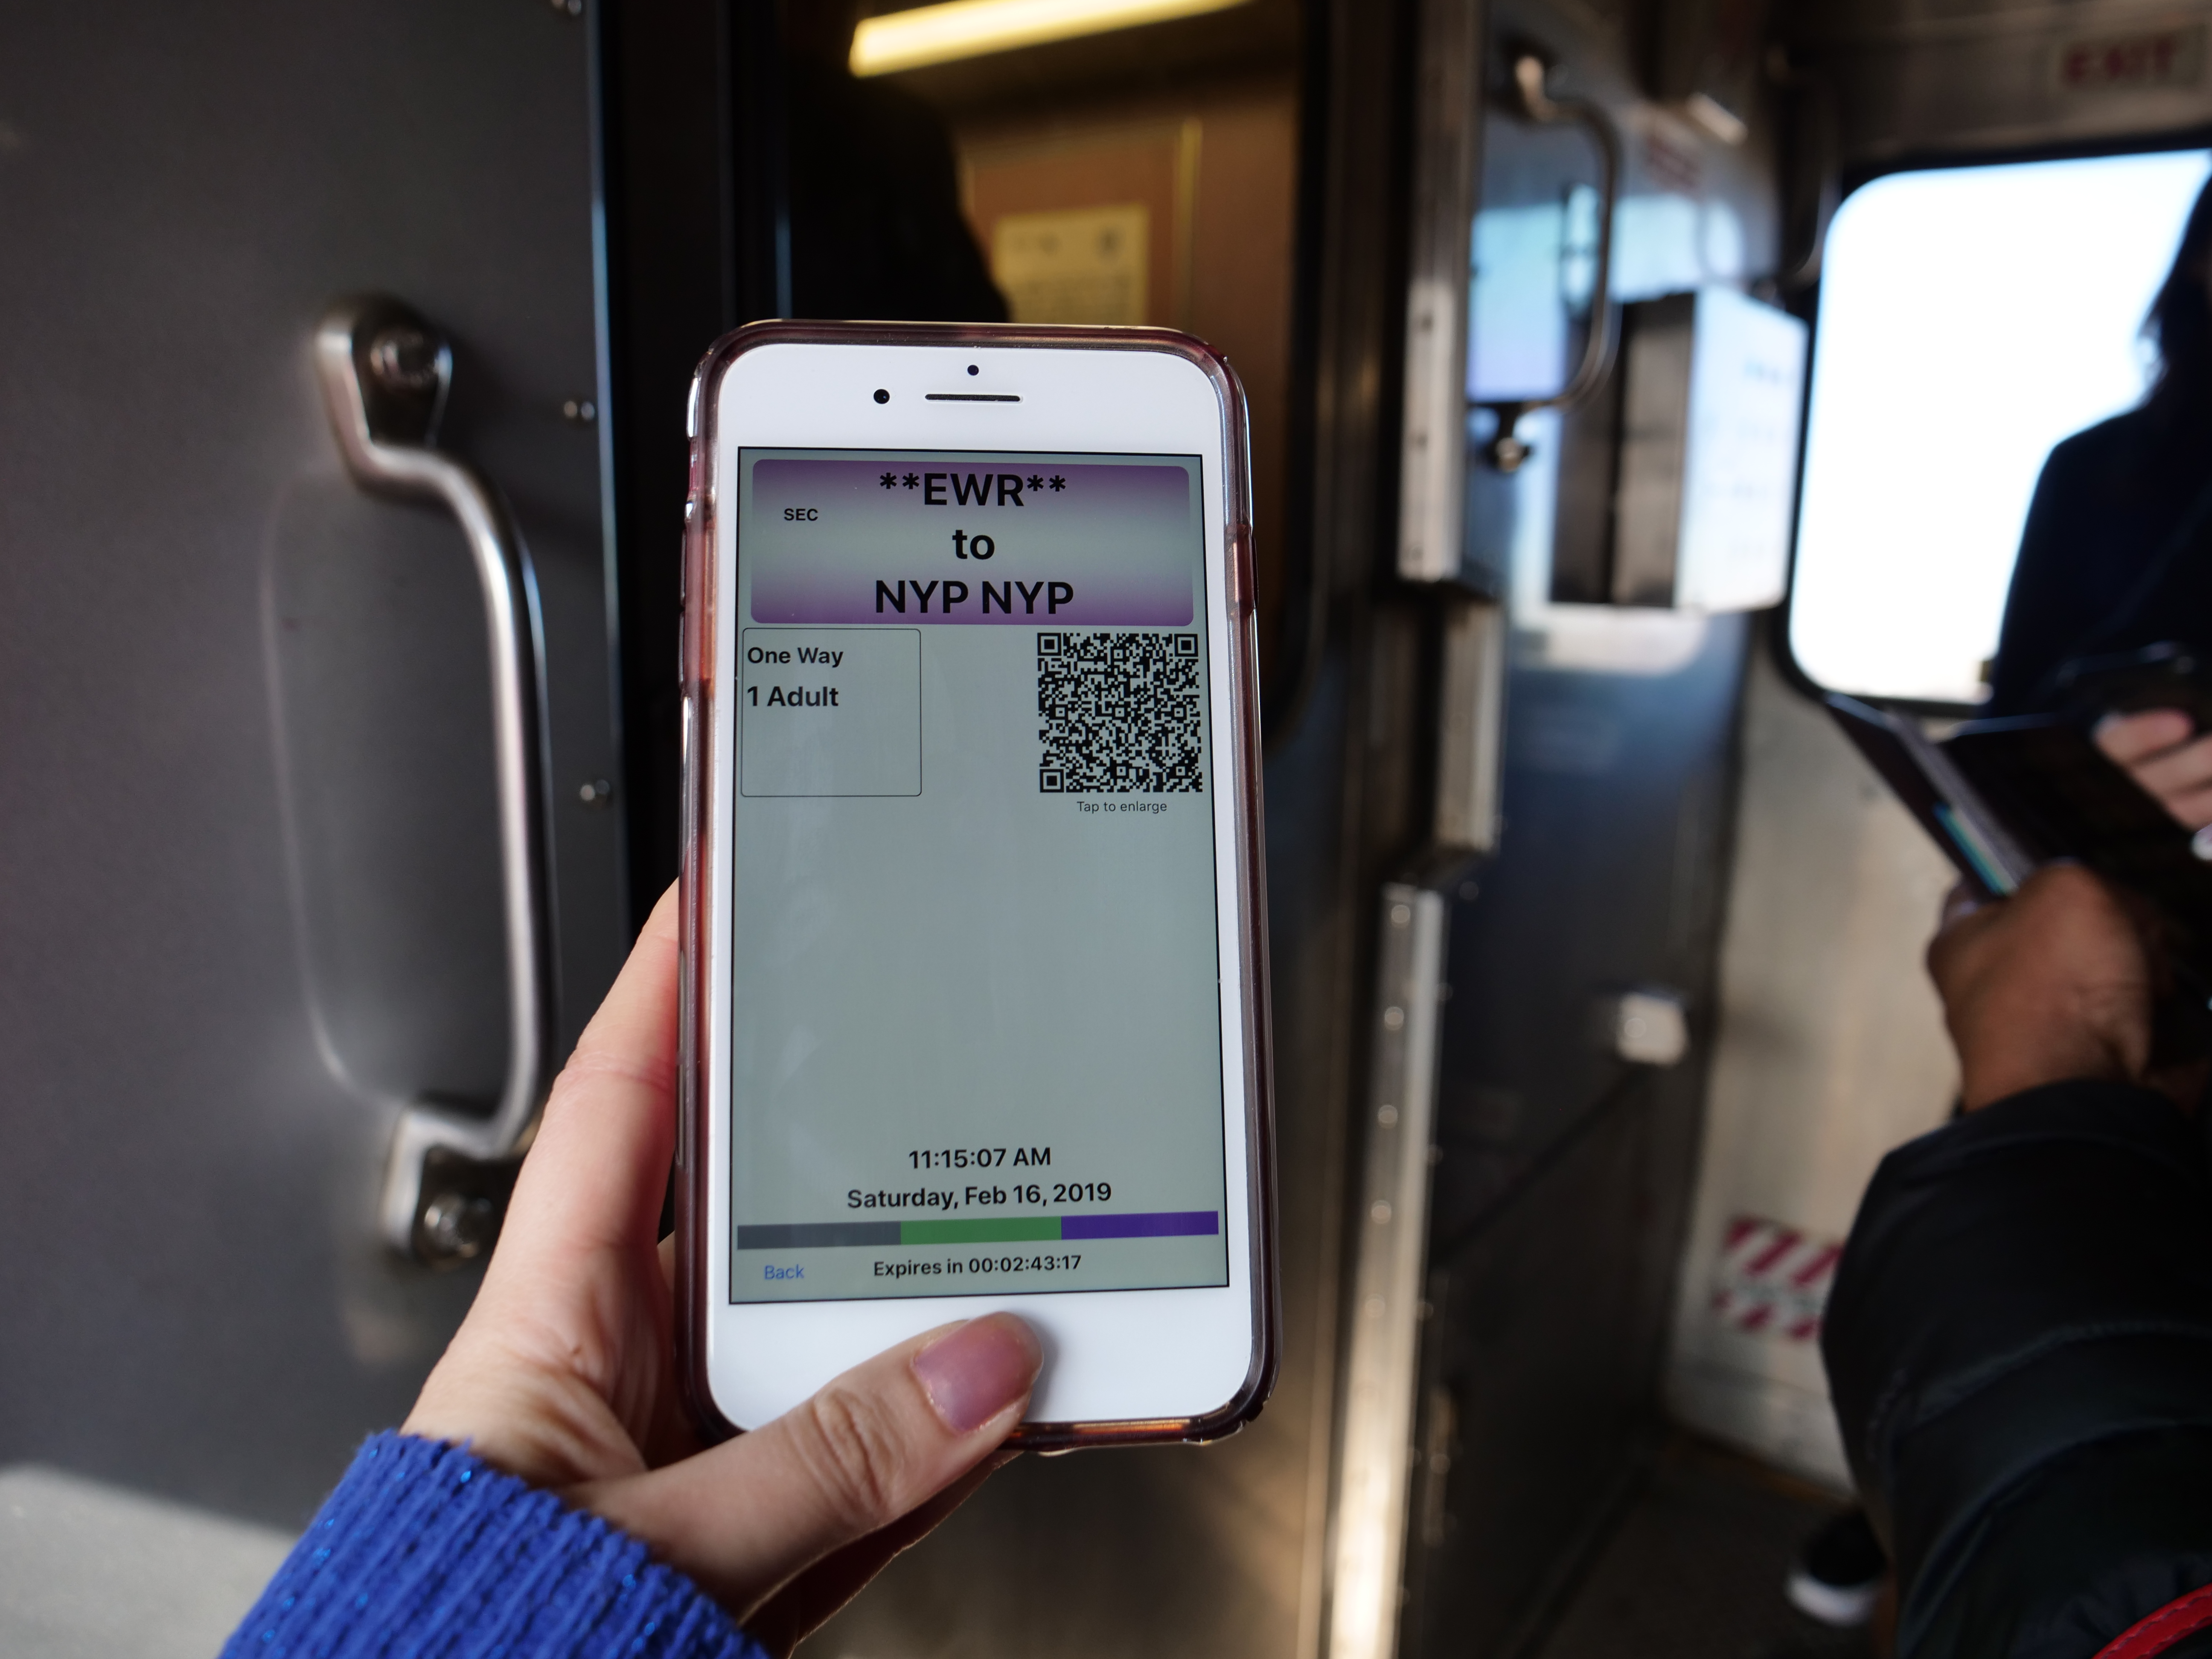 Airtrain NJ Transit Cheapest, Fastest Way from Newark to NYC Manhattan app on phone